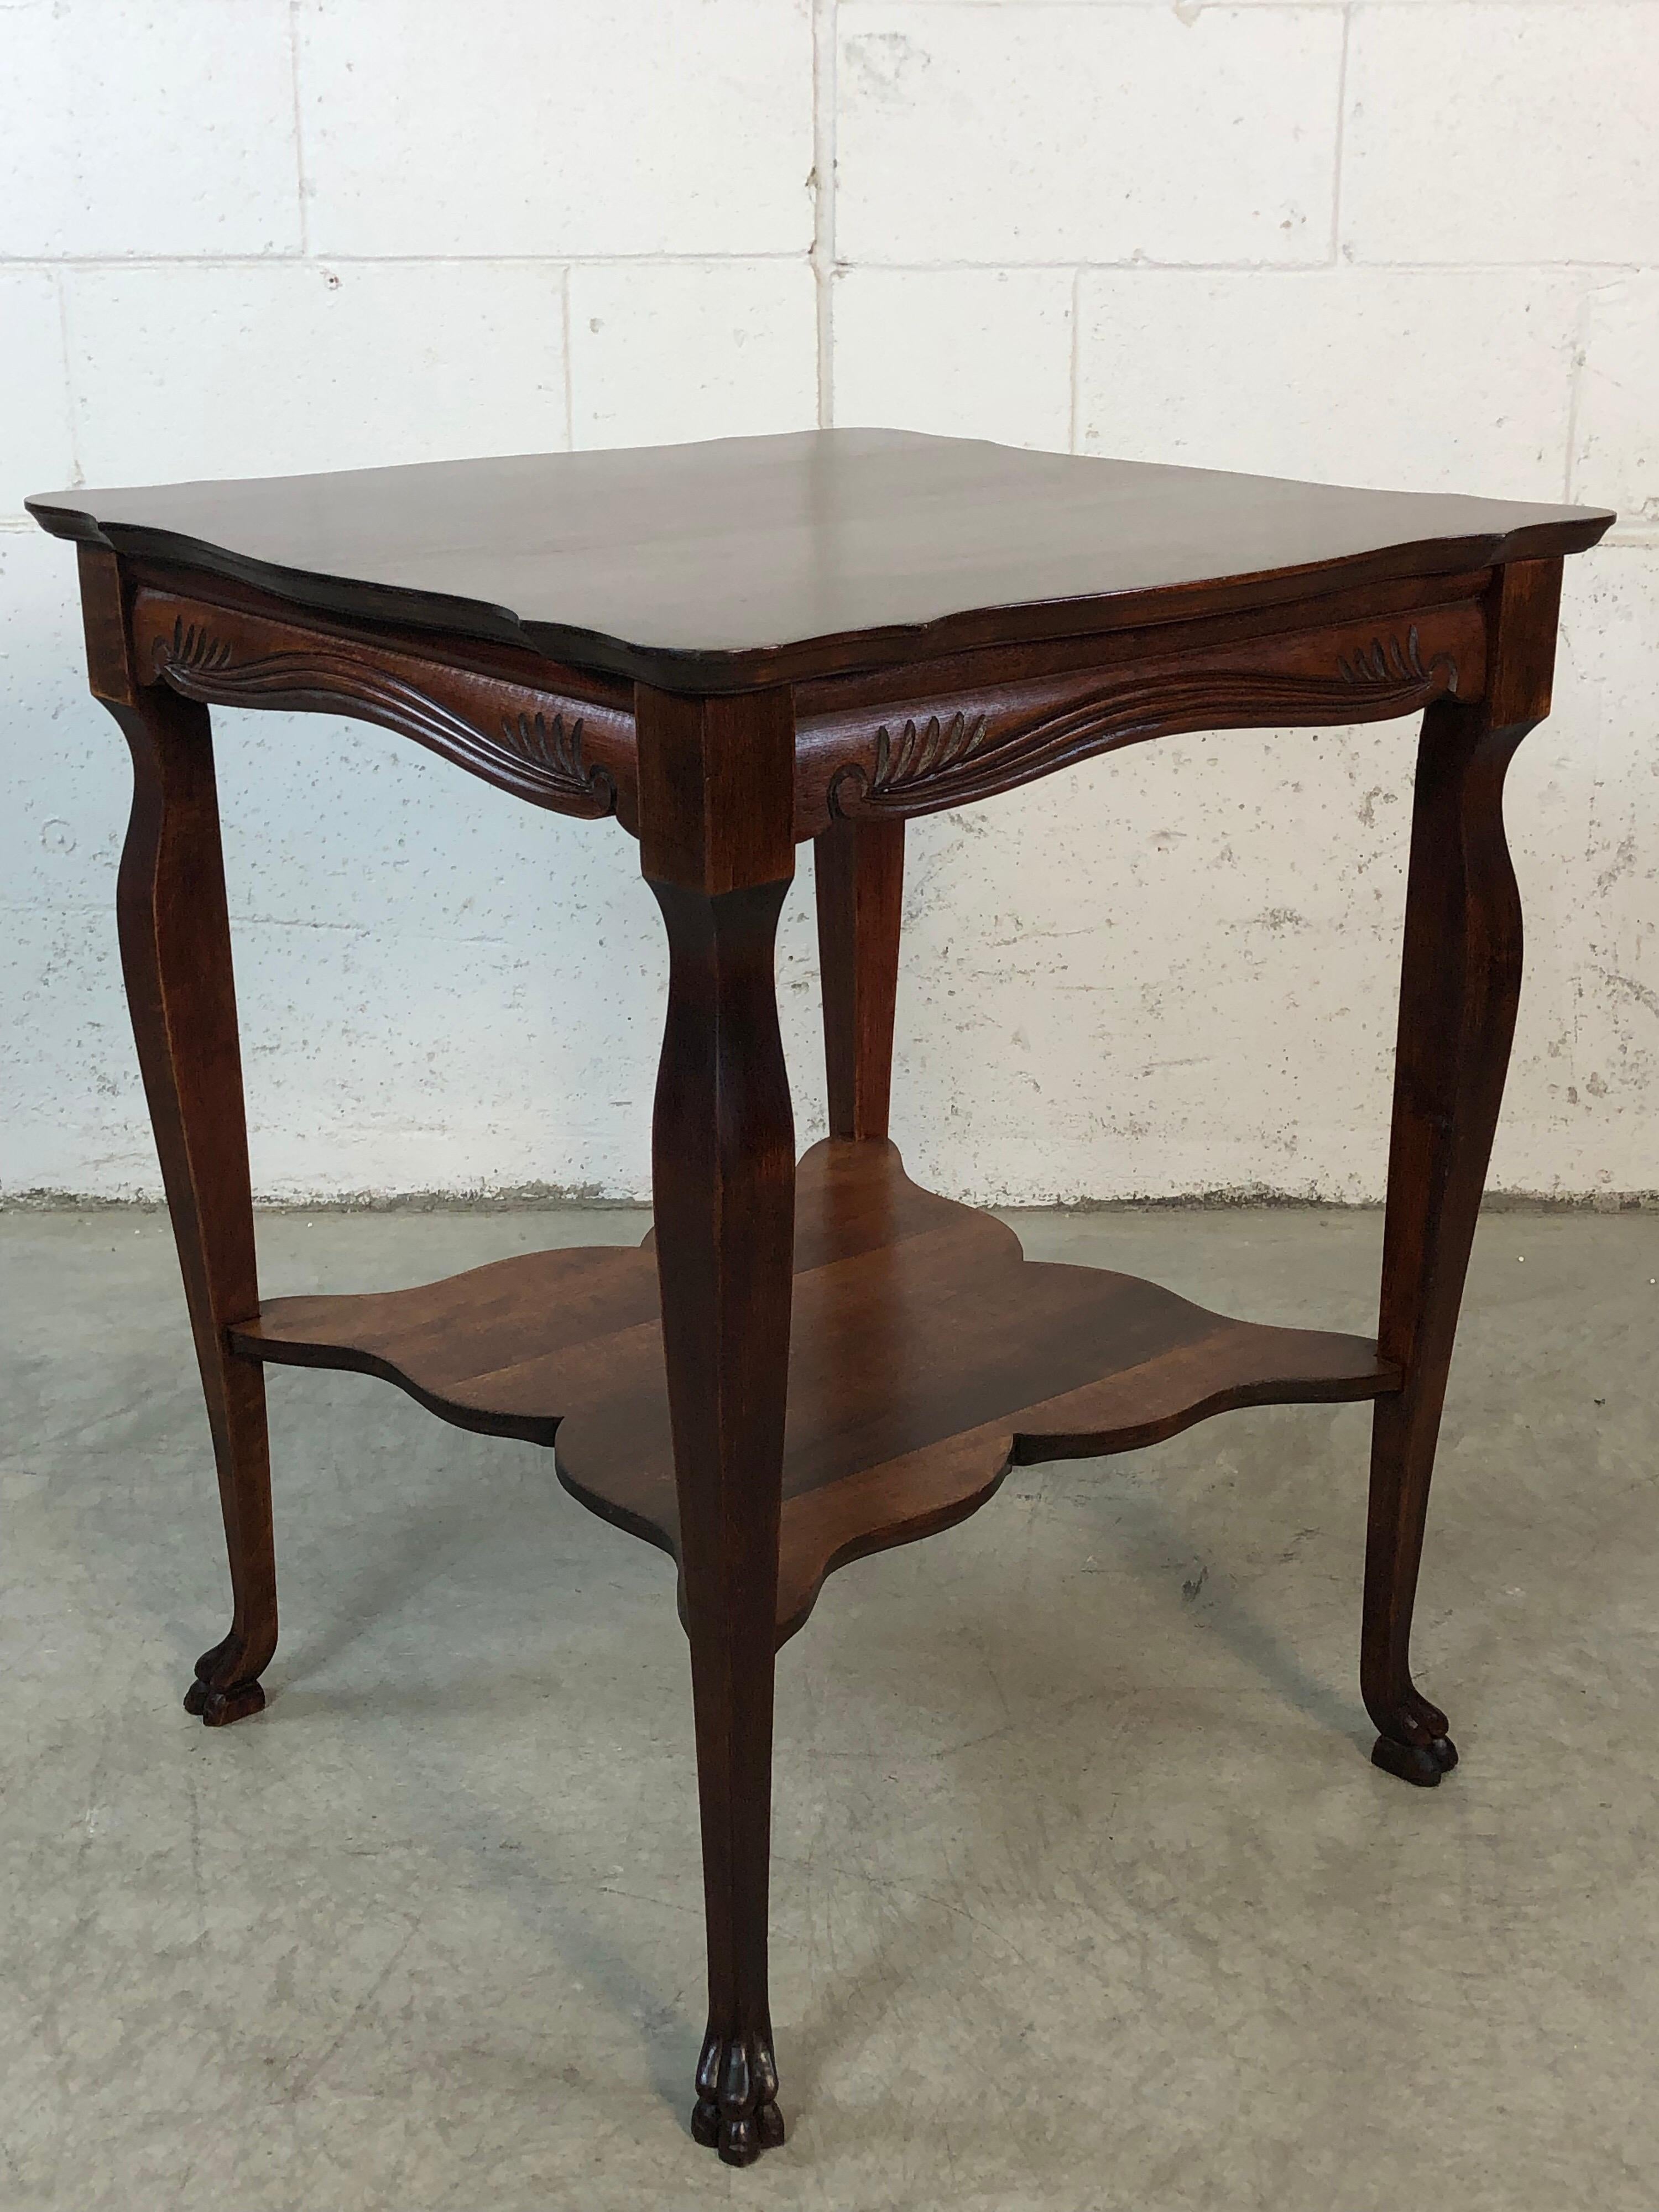 1930s square hand carved wood side table. The table has carved claw feet and carved accents along the skirt. The top of the table has a scalloped edge. The table is in fully restored condition.